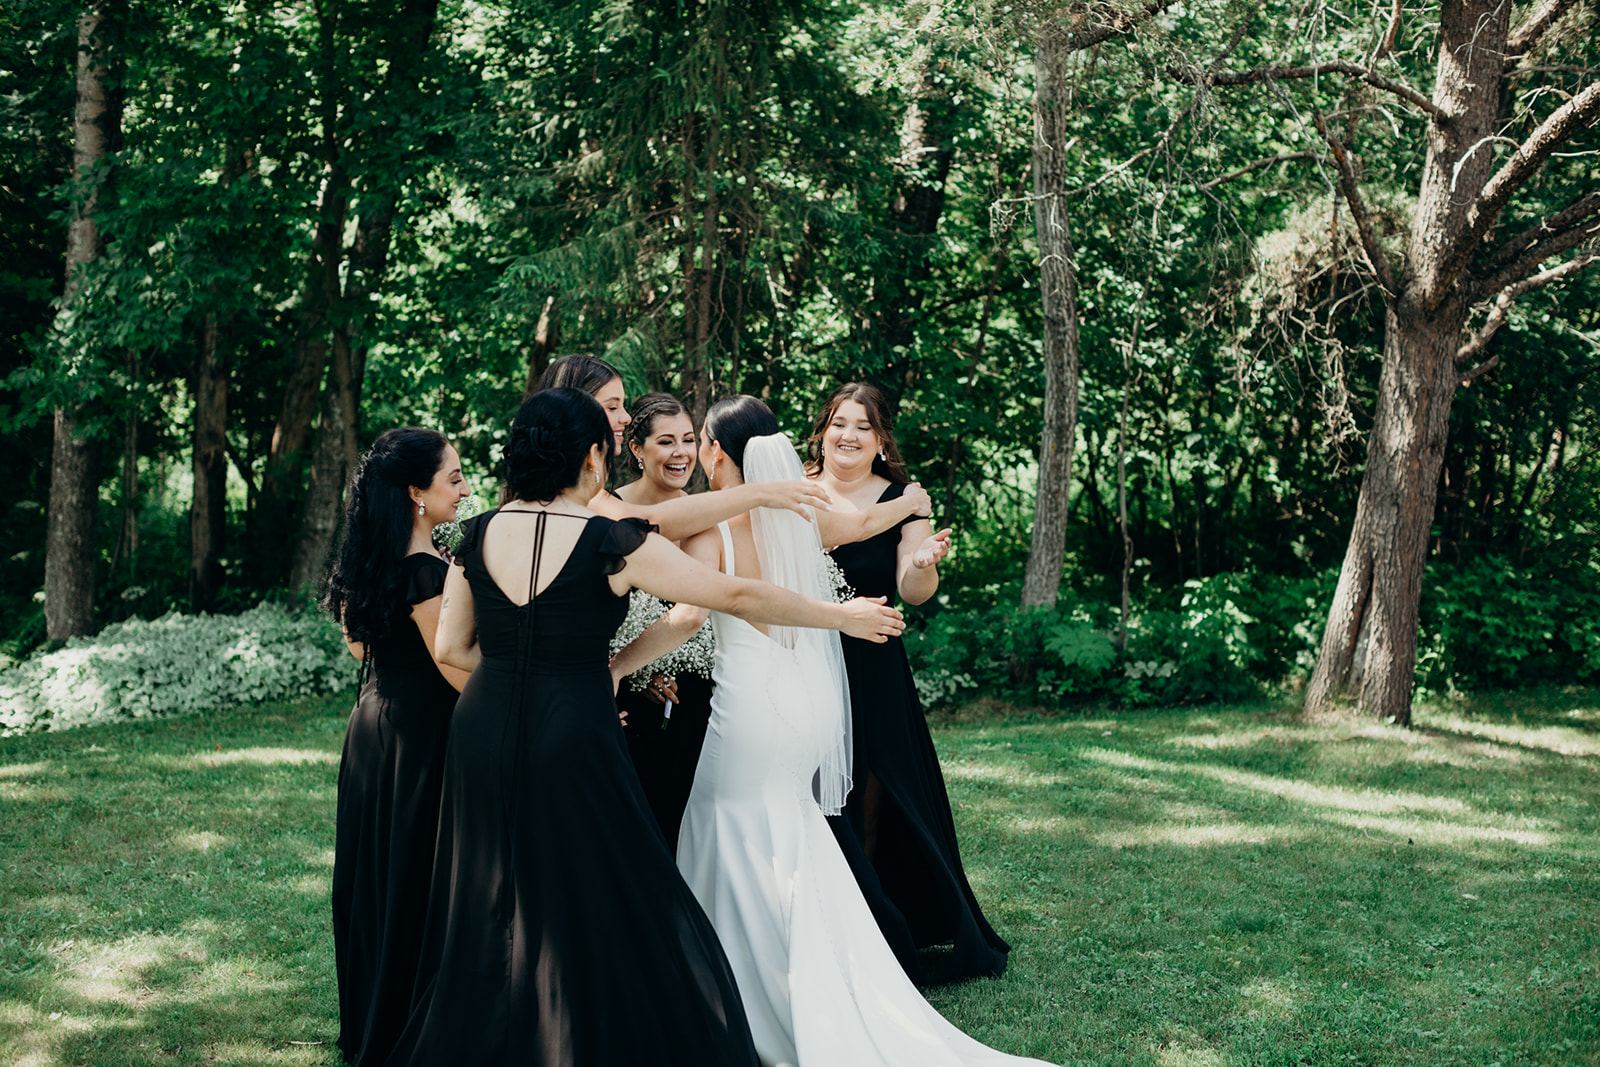 Bridesmaids hug after their first look with the bride